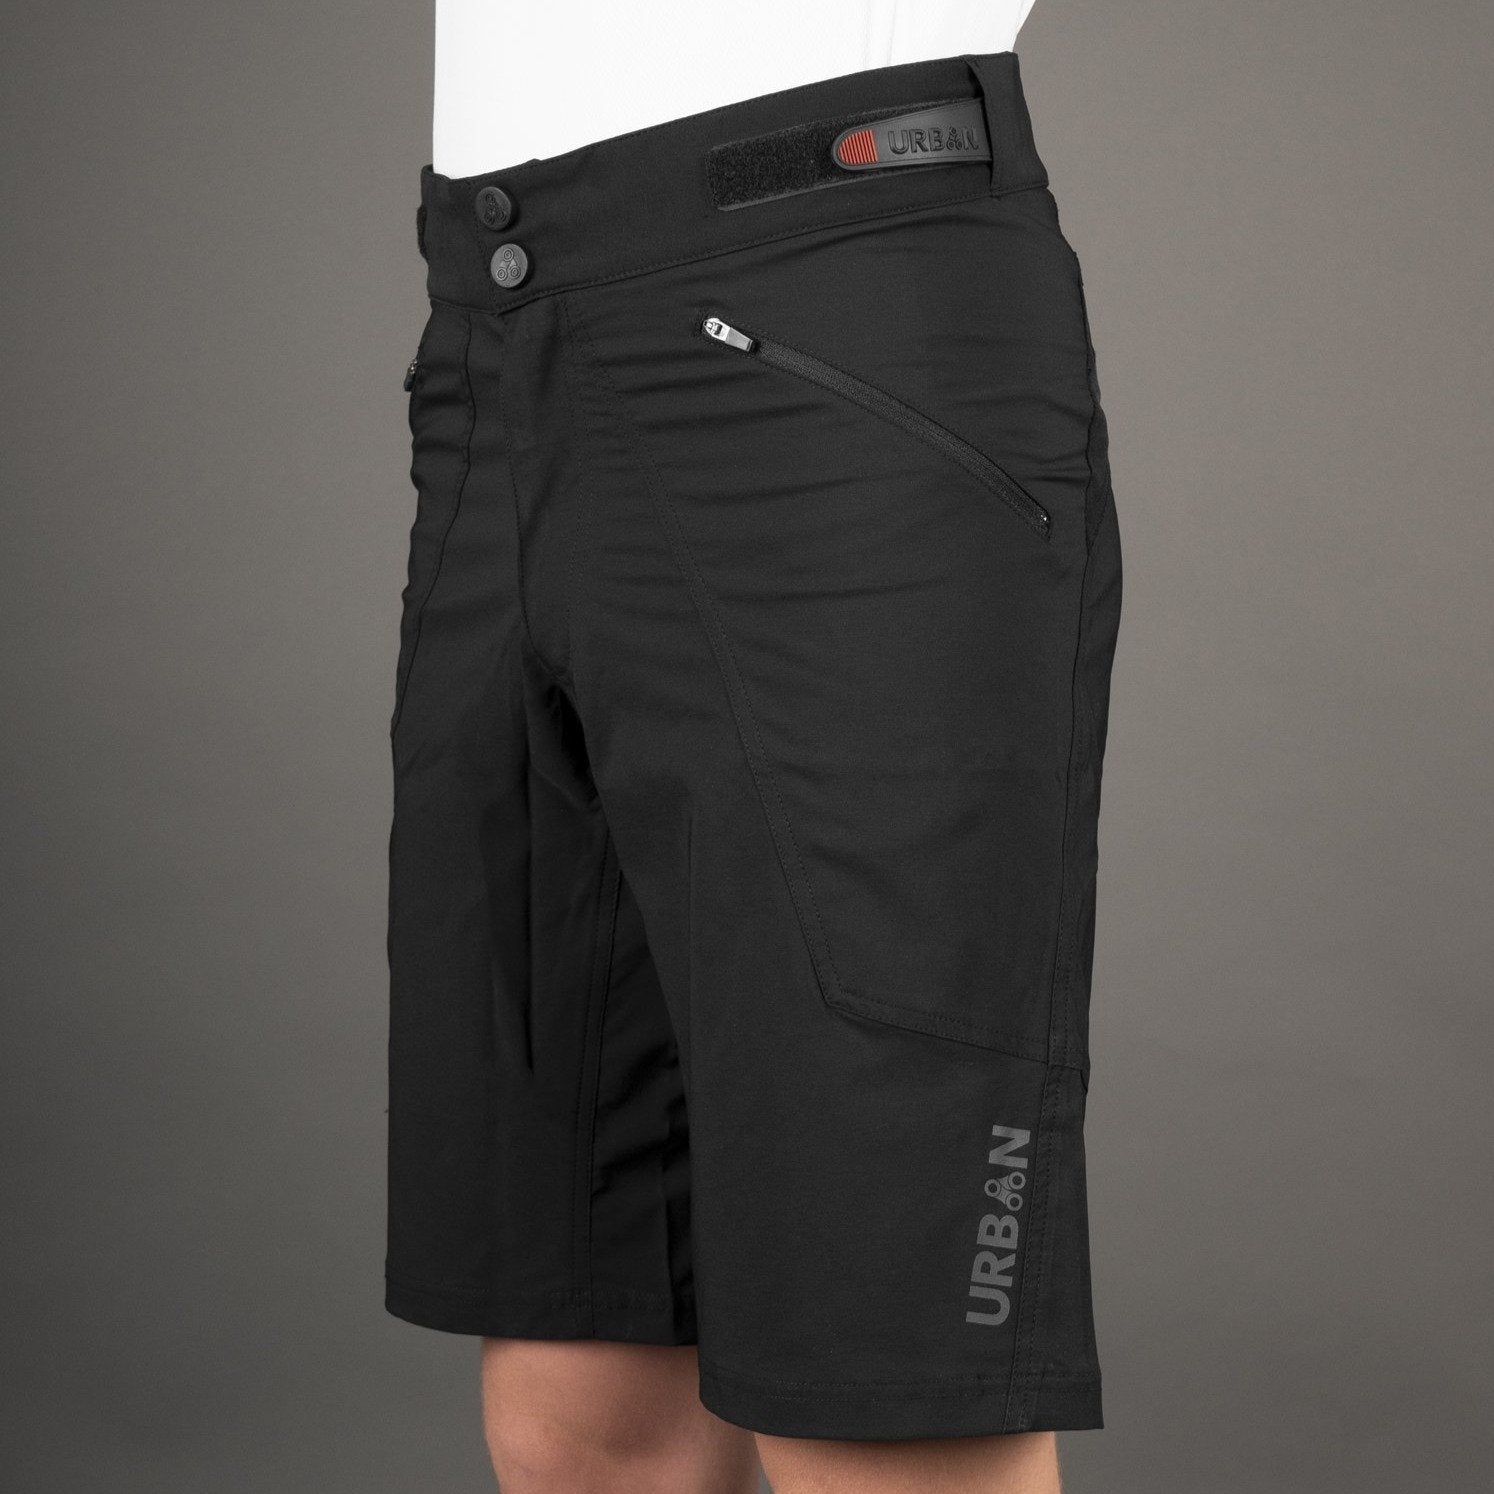 Men's Pro Padded Cycling Shorts with Hidden Cargo Pockets - Urban